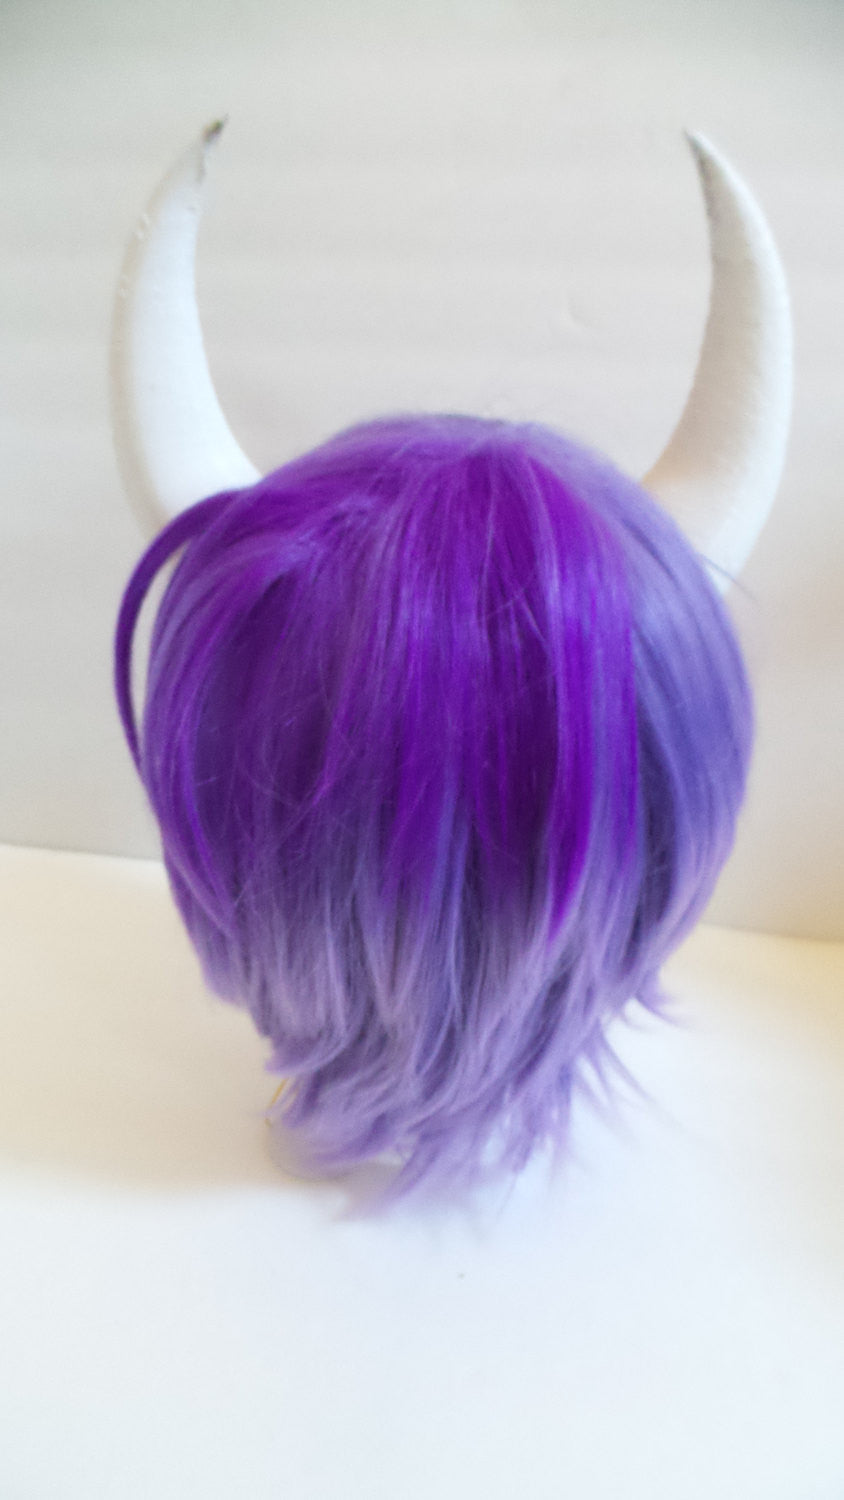 Goat fantasy 3d printed horns many multi mounting and color options horns on headband black white gray - Mud And Majesty